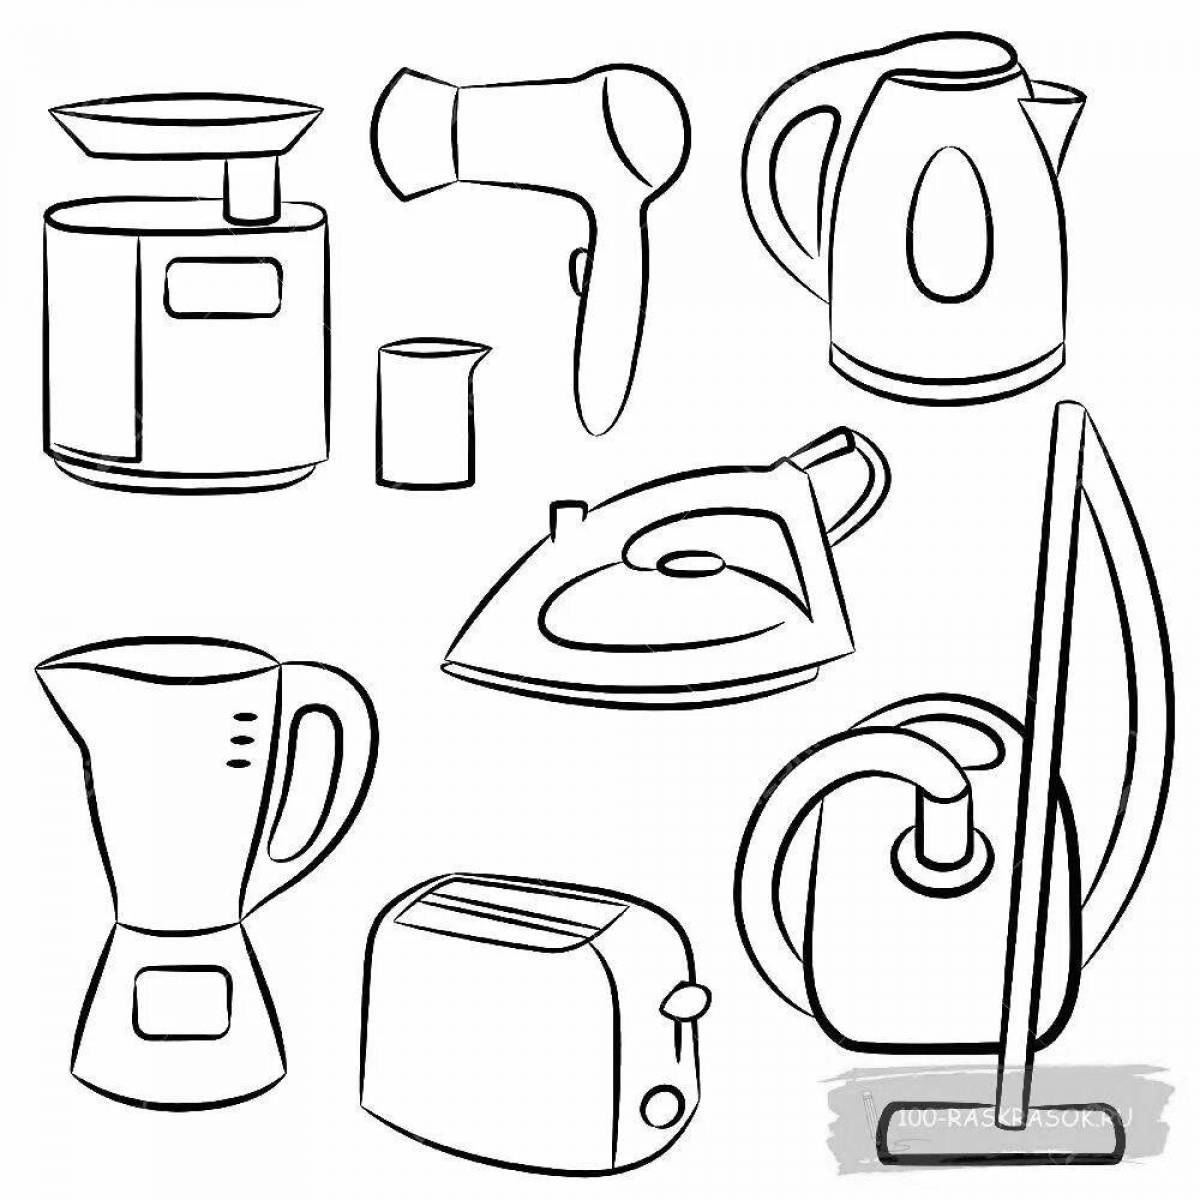 Coloring page delicate household utensils